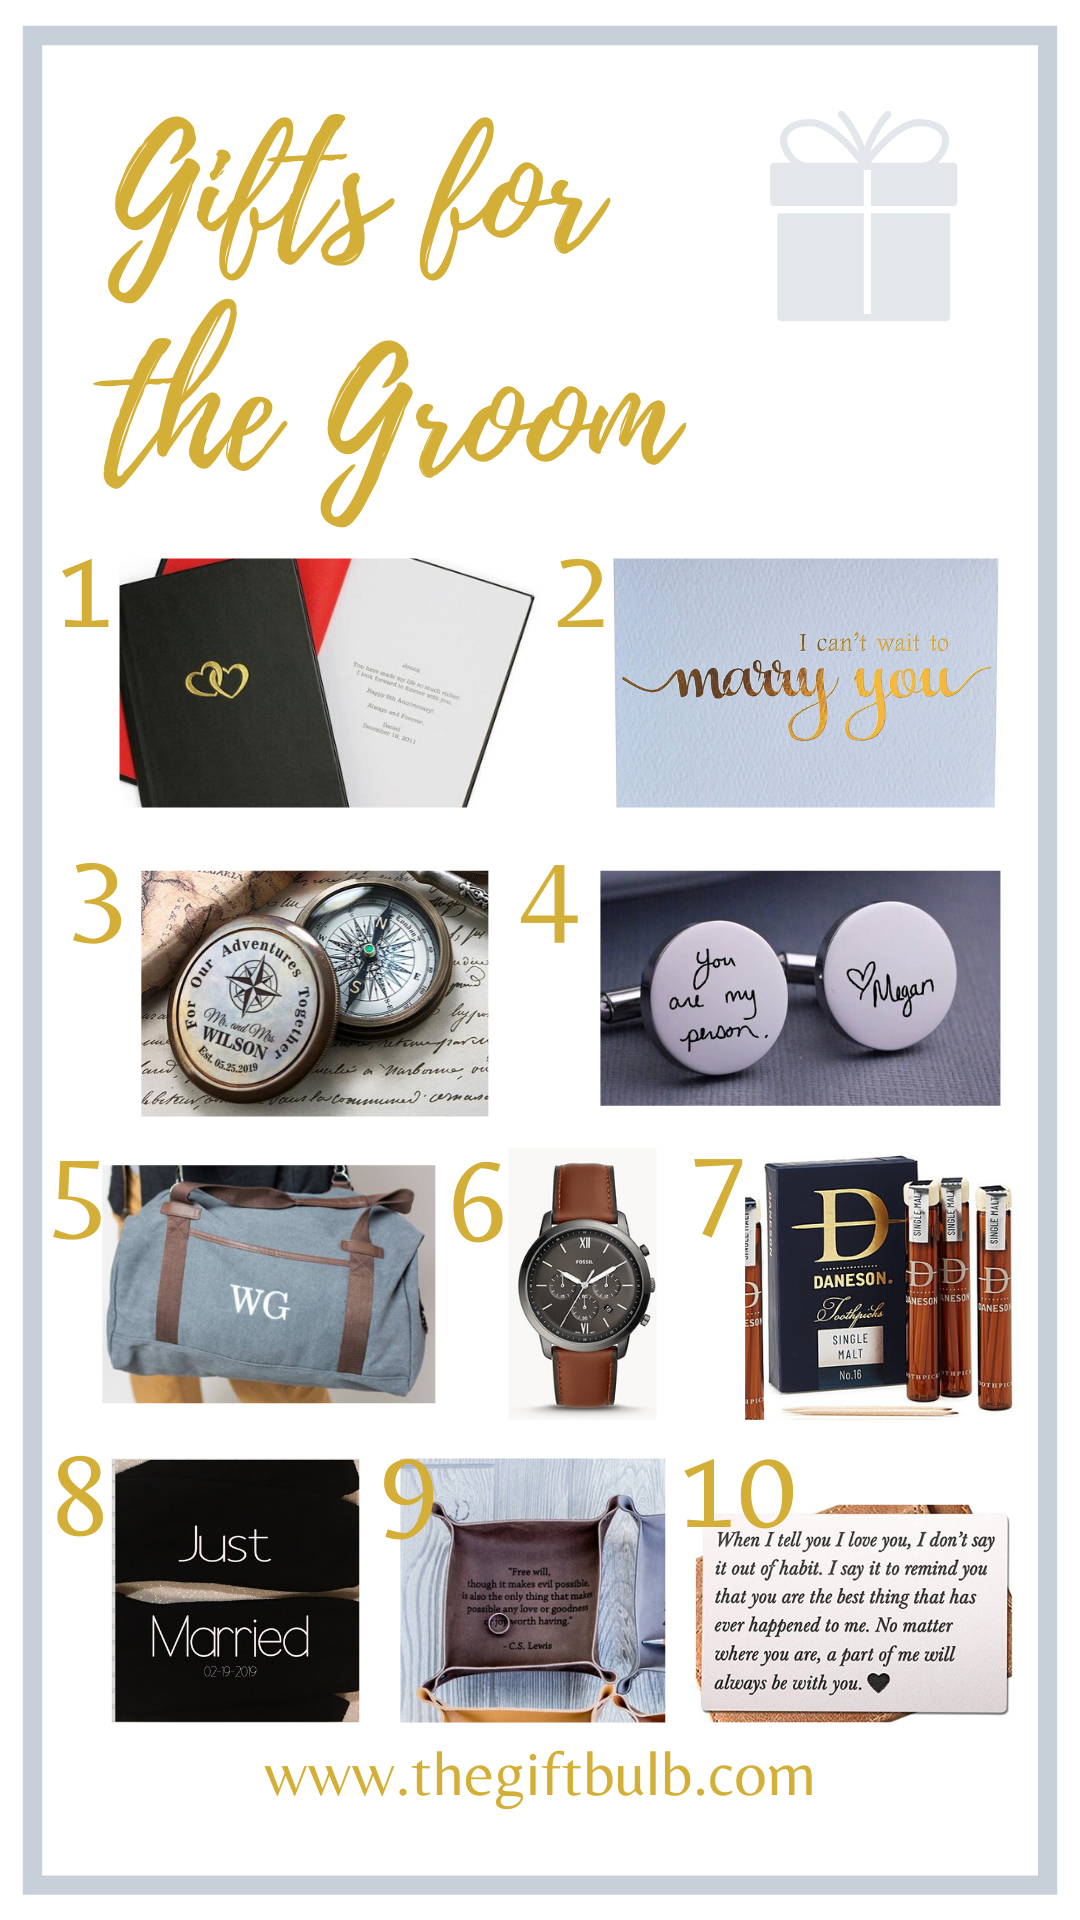 Gifts for the Groom - The Gift Bulb